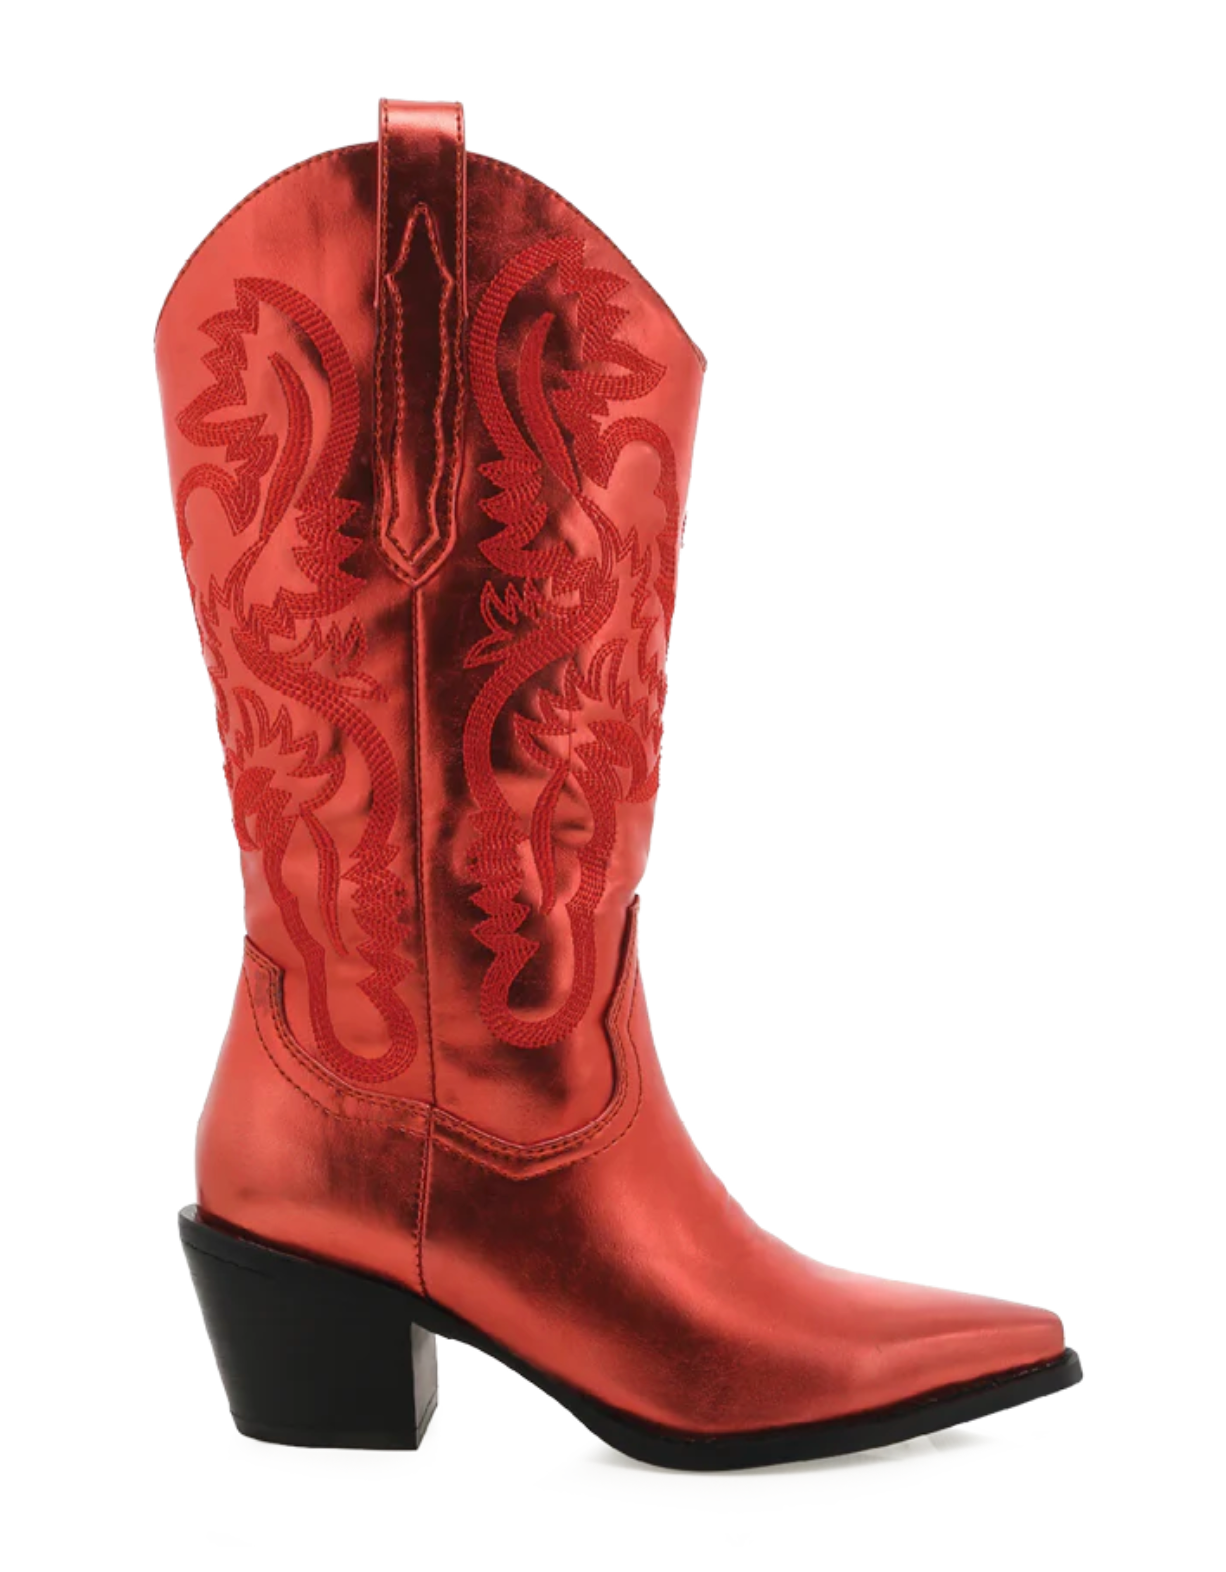 Red Metallic Boots